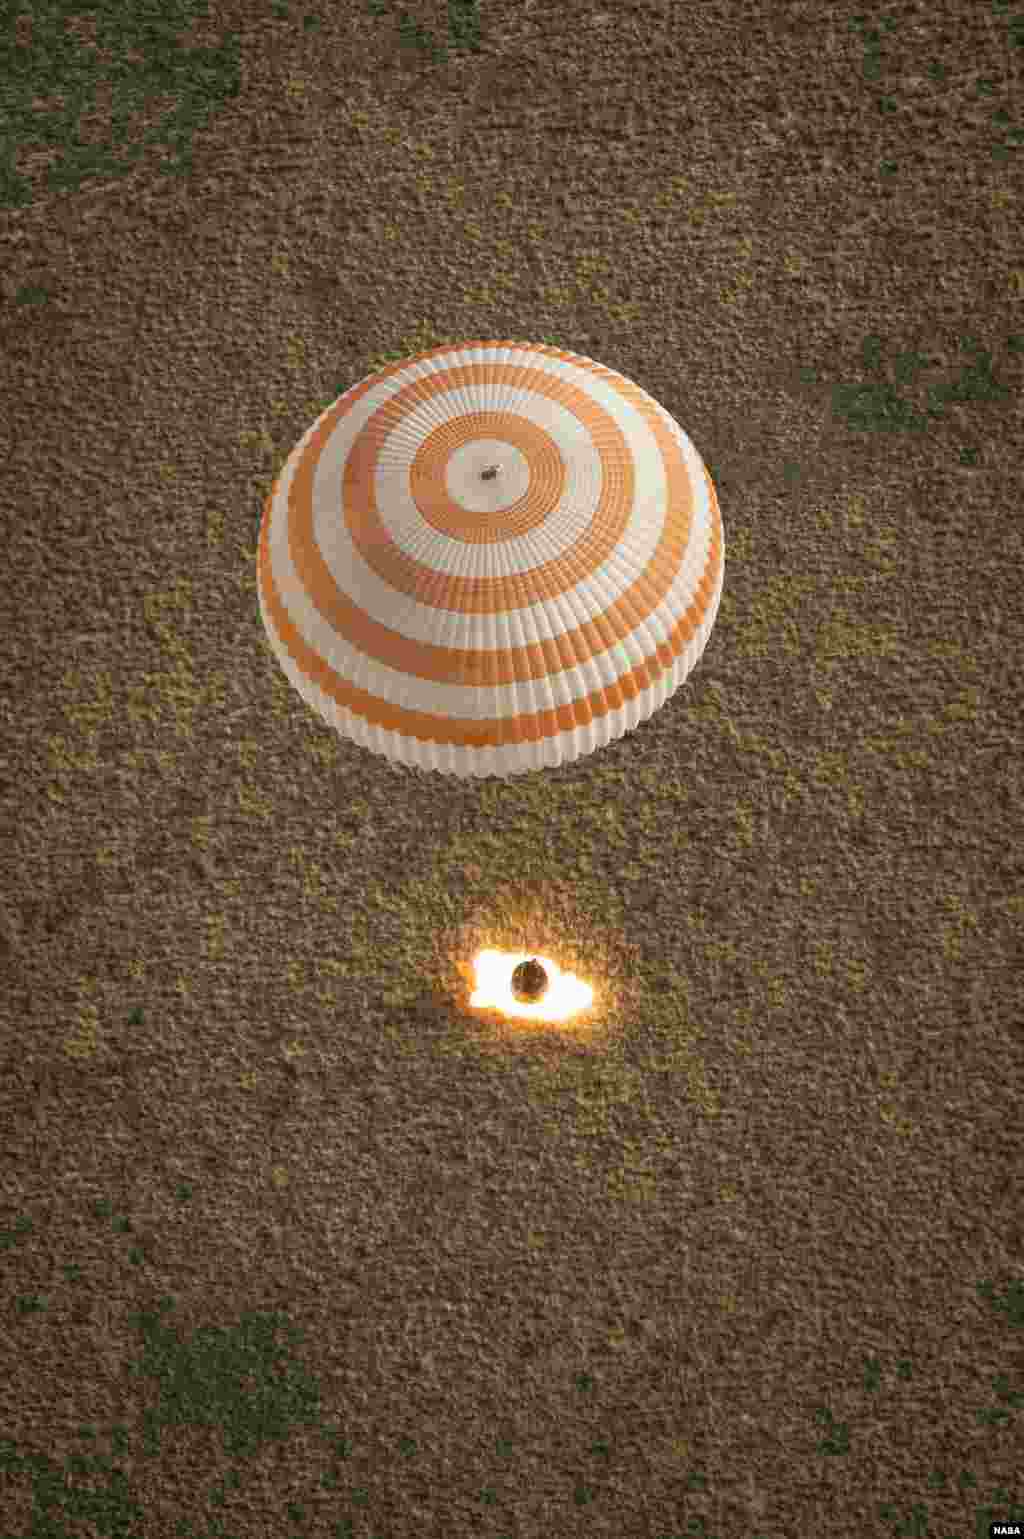 The Soyuz TMA-08M spacecraft with Expedition 36 Commander Pavel Vinogradov of the Russian Federal Space Agency, Flight Engineer Alexander Misurkin of Roscosmos and Flight Engineer Chris Cassidy of NASA aboard, lands in a remote area near the town of Zhezkazgan, Kazakhstan.